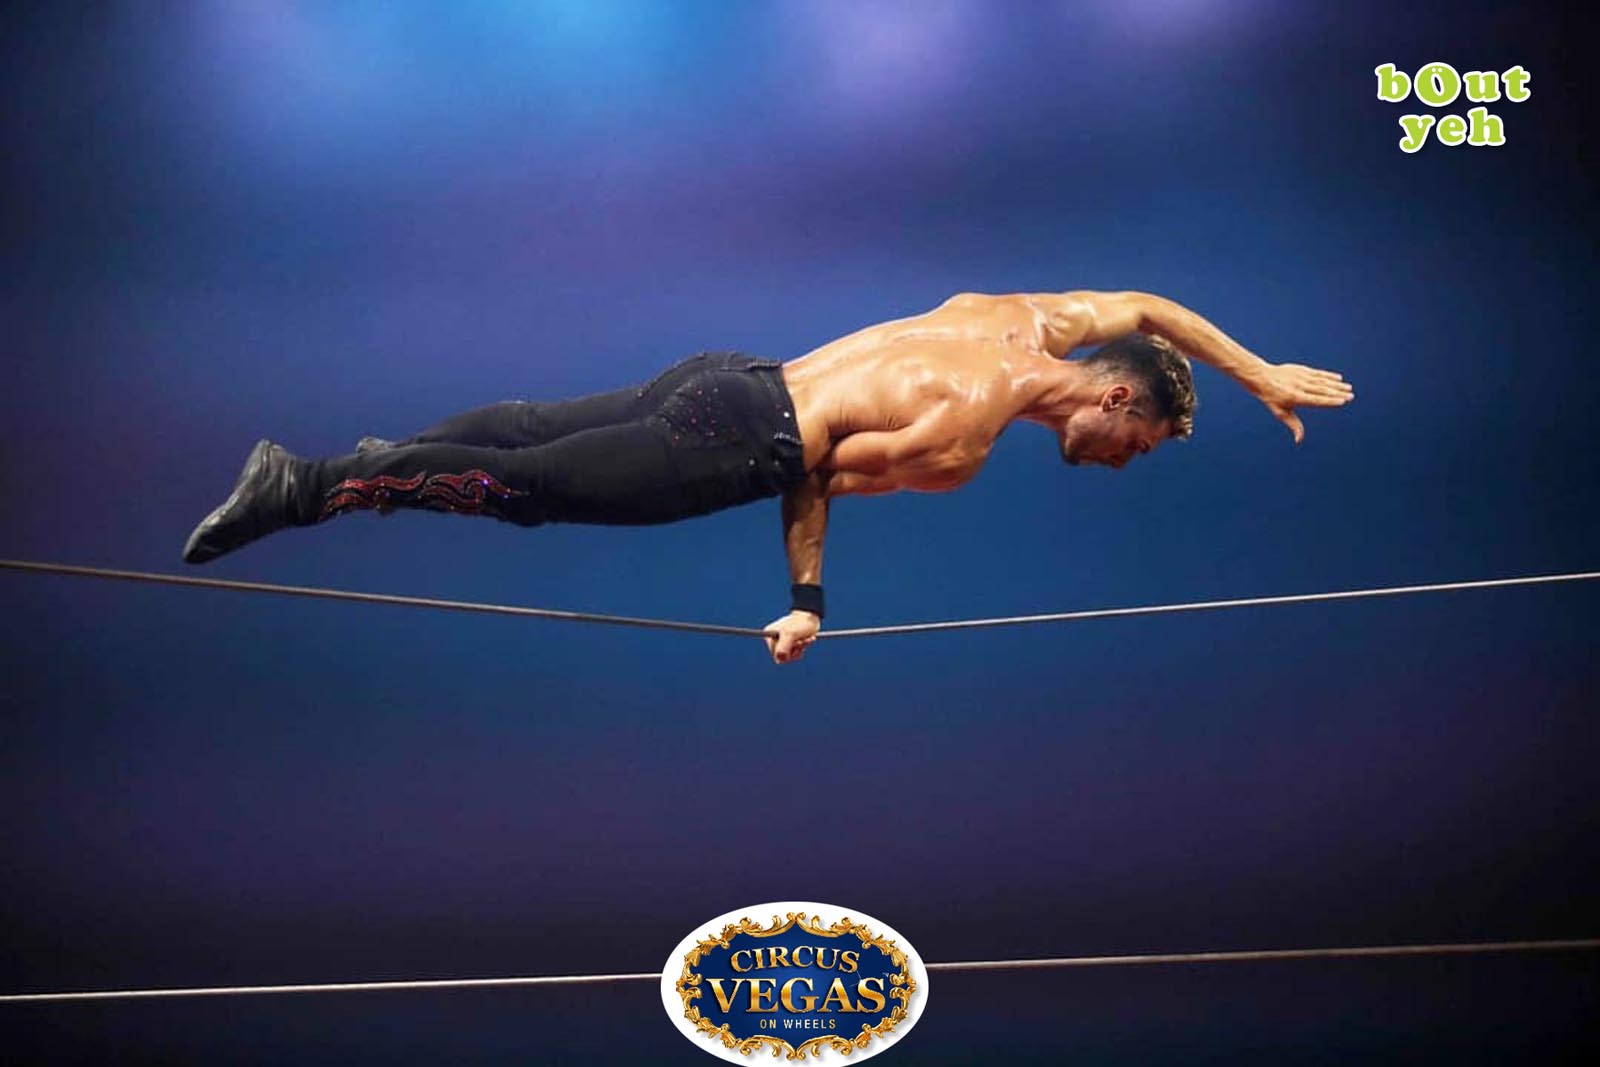 Social Media Marketing Consultants Belfast - Circus Vegas campaign photo of high wire performer. Photo by Bout Yeh used in a Social Media Marketing campaign across Bout Yeh's Social Media platforms for Circus Vegas On Wheels Ireland